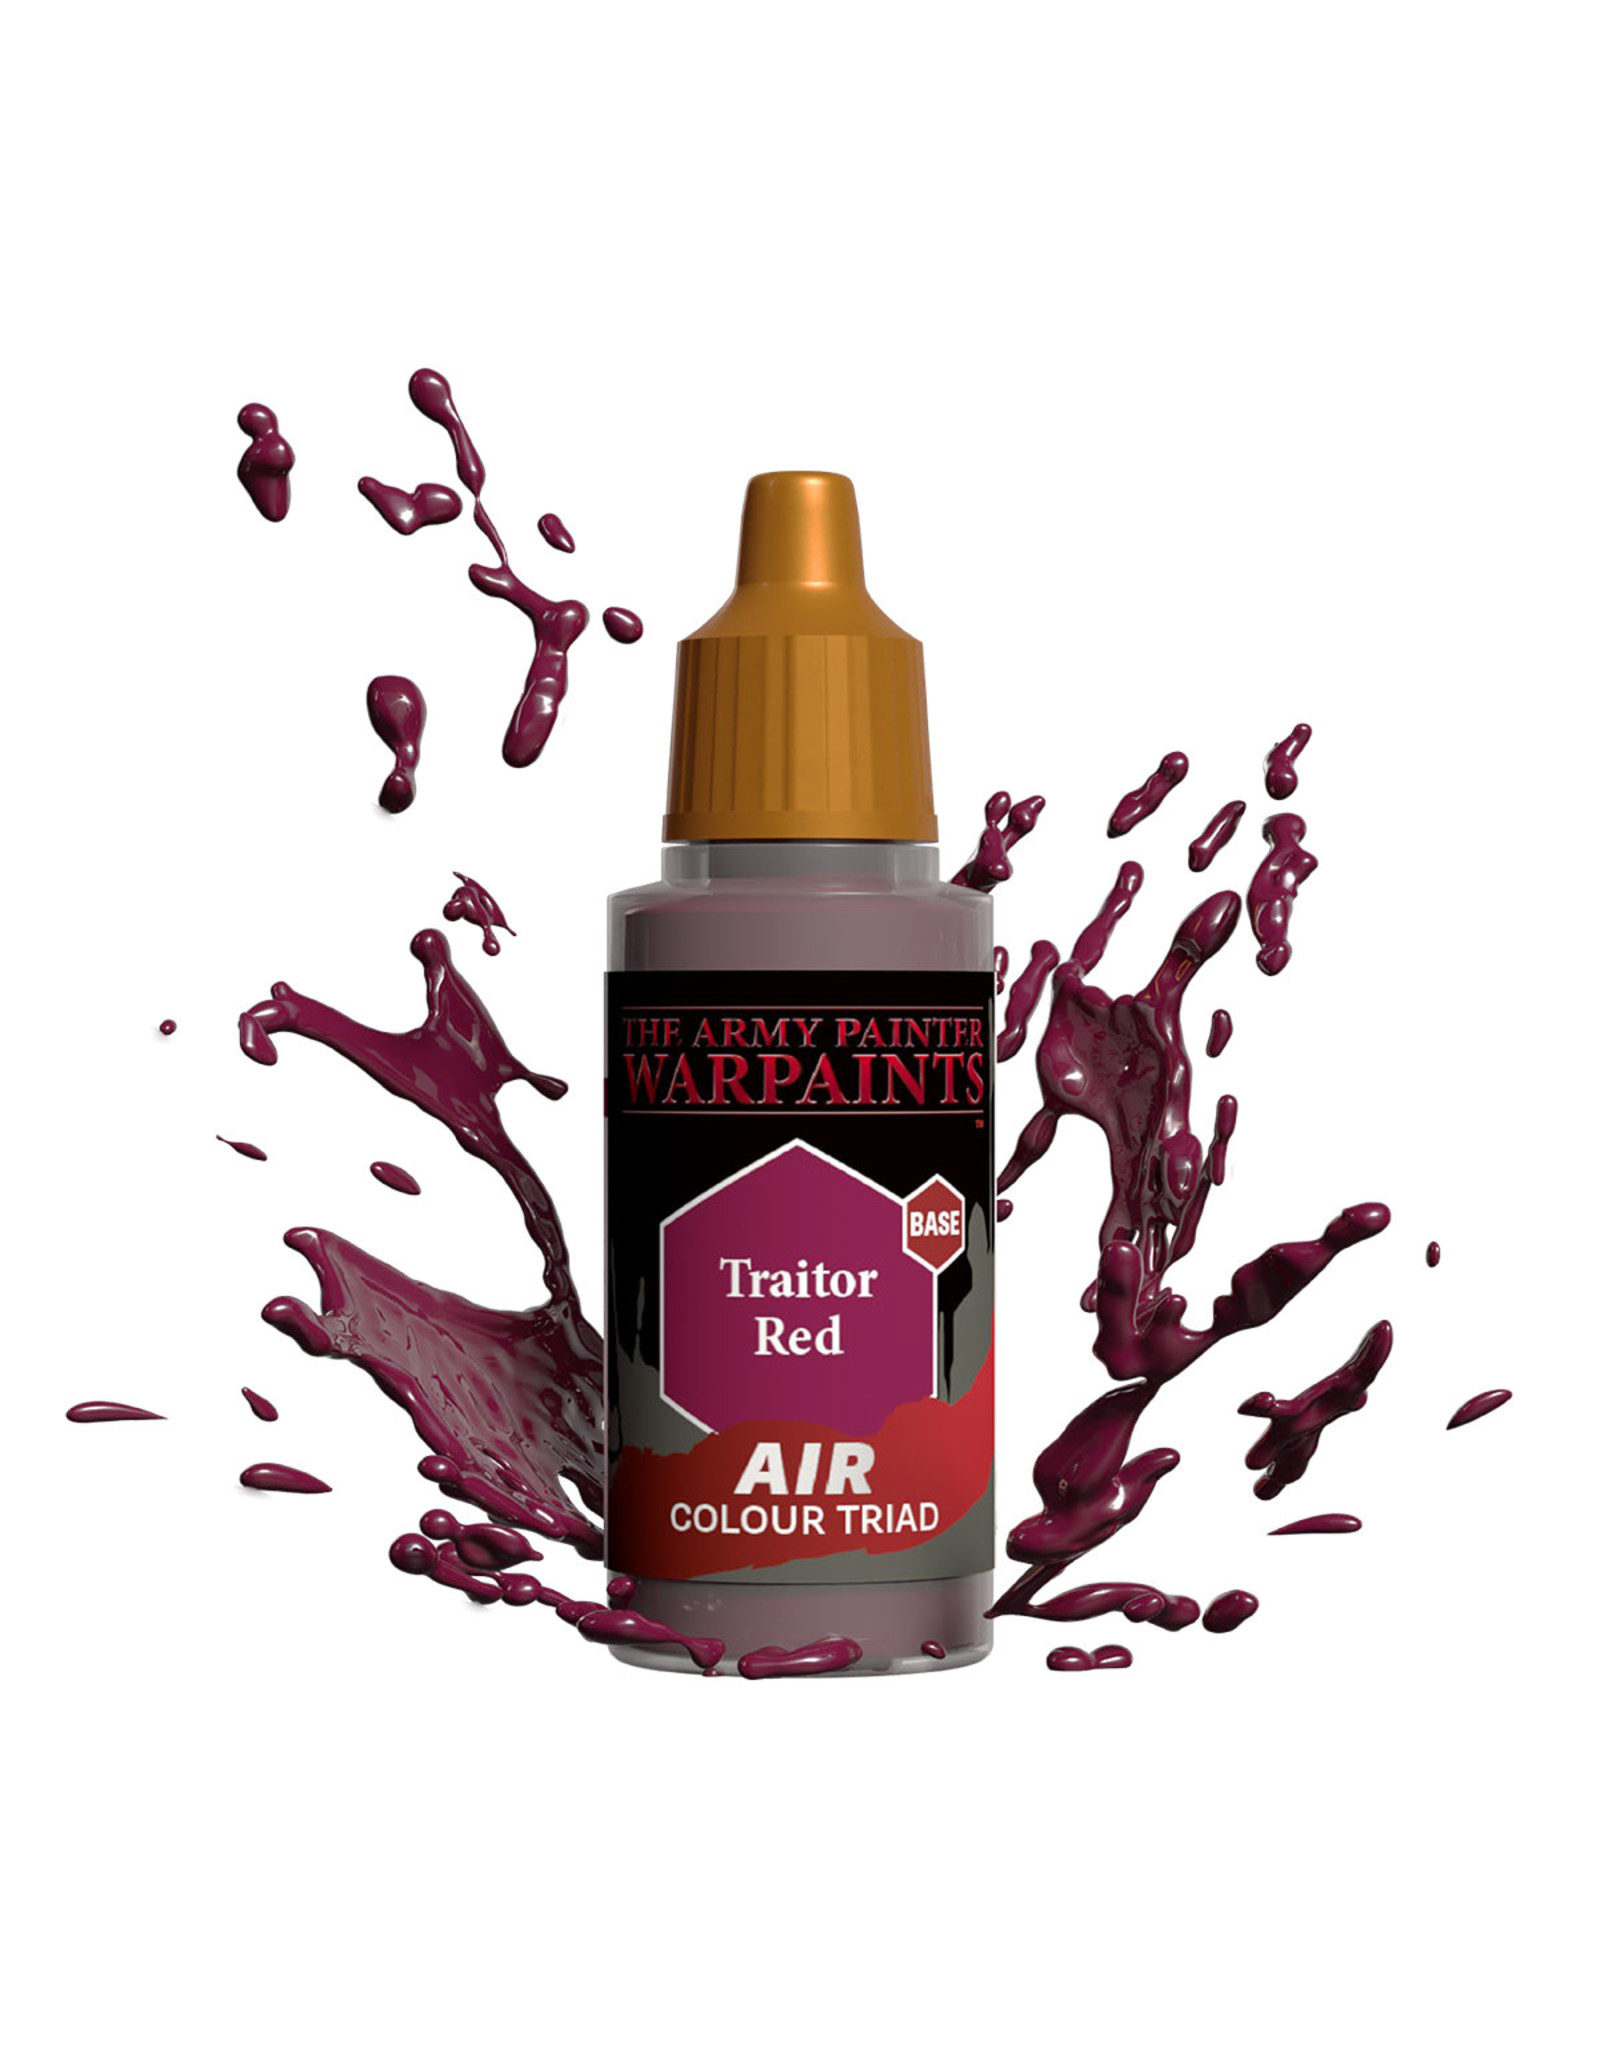 The Army Painter The Army Painter Warpaints Air: Traitor Red